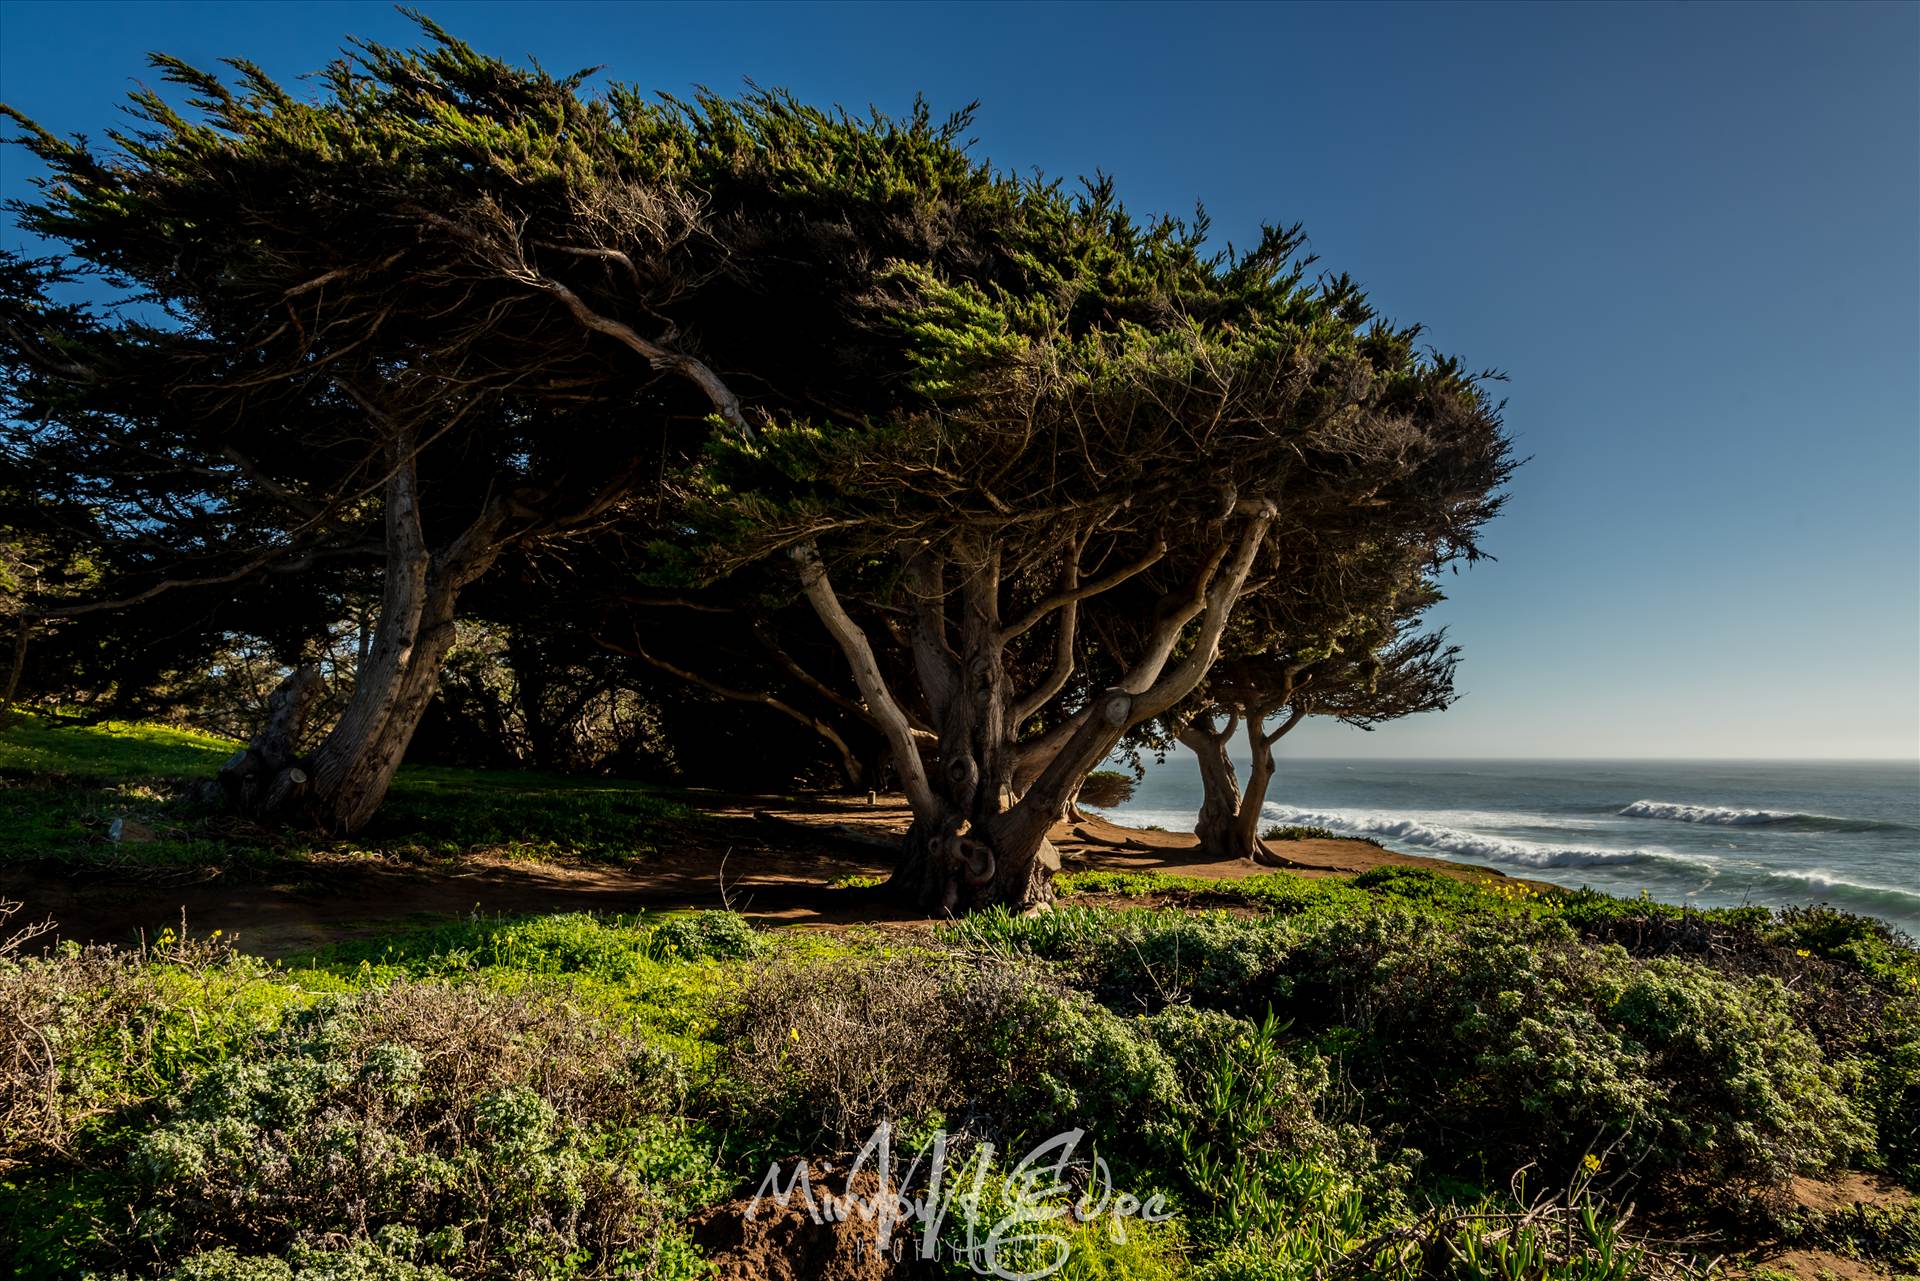 Cambria Pine by the Sea 02132016.jpg undefined by Sarah Williams